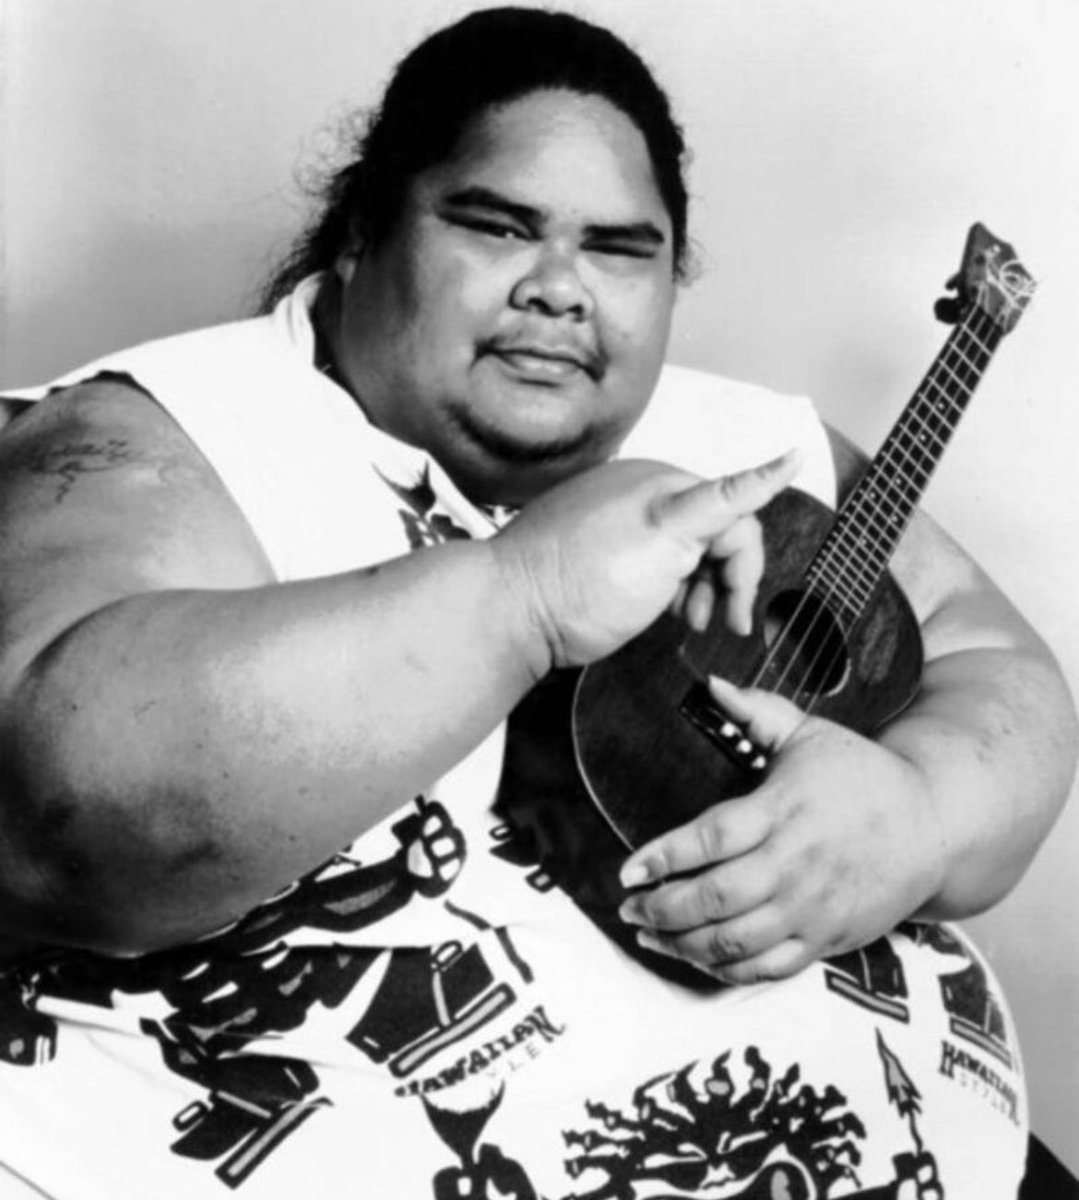 In 1988, during the late hours of the night, a Hawaiian musician named Israel Kamakawiwo'ole reached out to a local studio, urgently requesting a recording session. Eagerly, he implored the engineer, expressing his desire to bring his idea to life. In a remarkable display of…